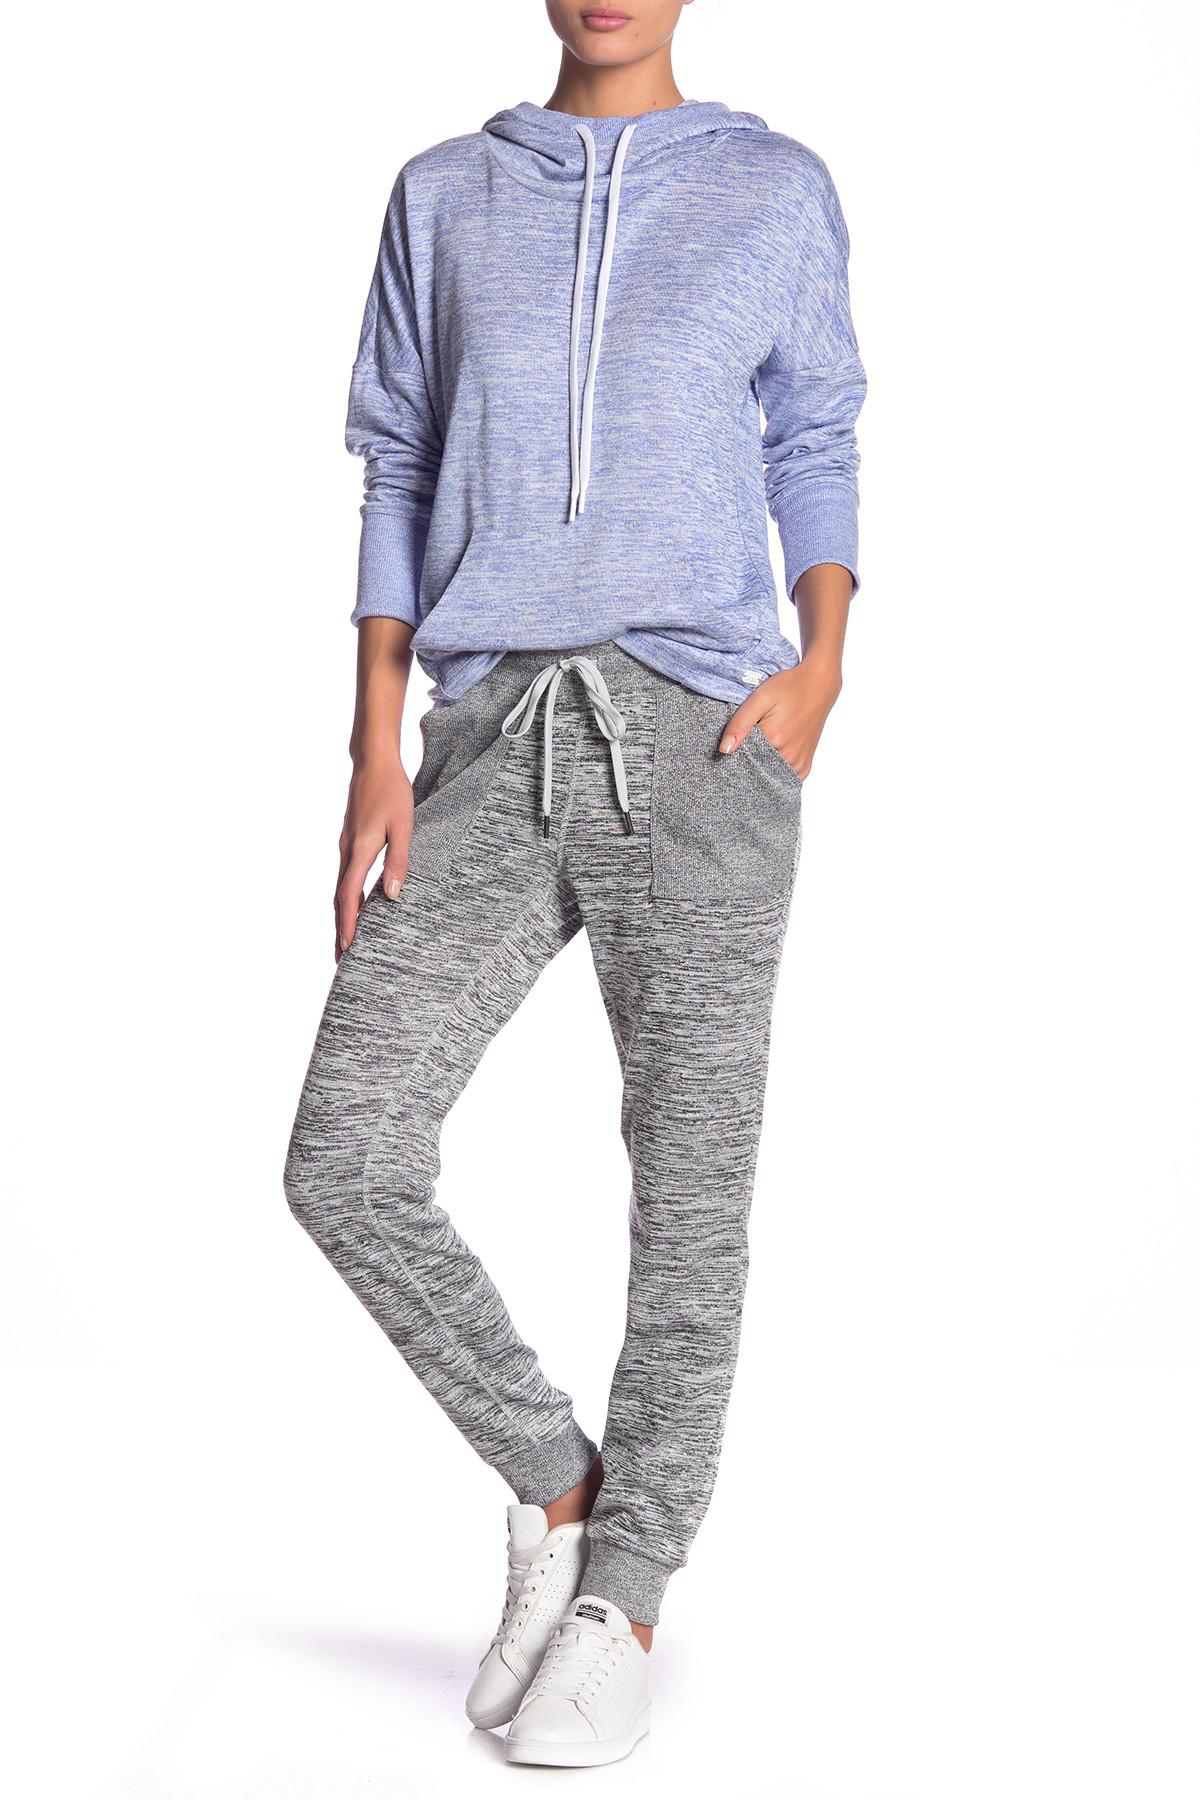 Marc New York Synthetic Marled Knit Long Jogger Sweats in Grey (Gray ...